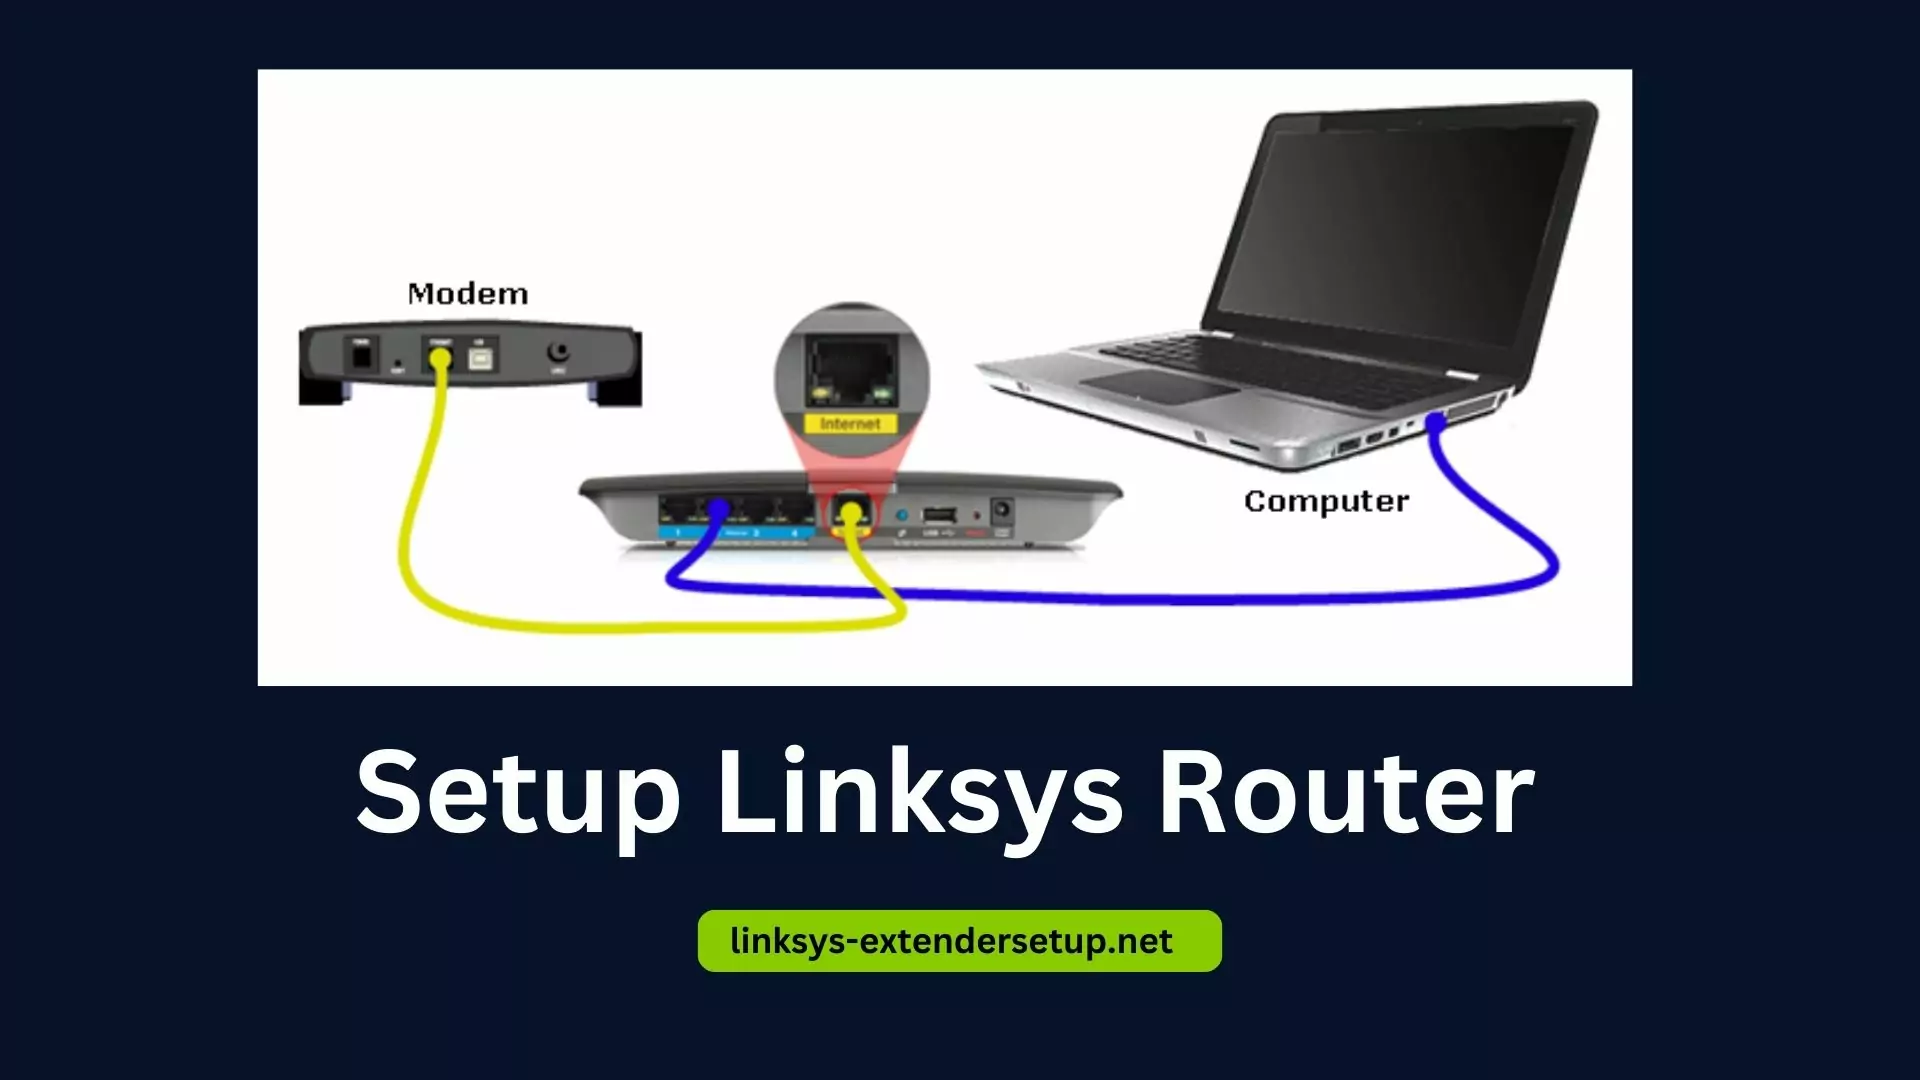 You are currently viewing Using an Ethernet cable to Setup Linksys Router